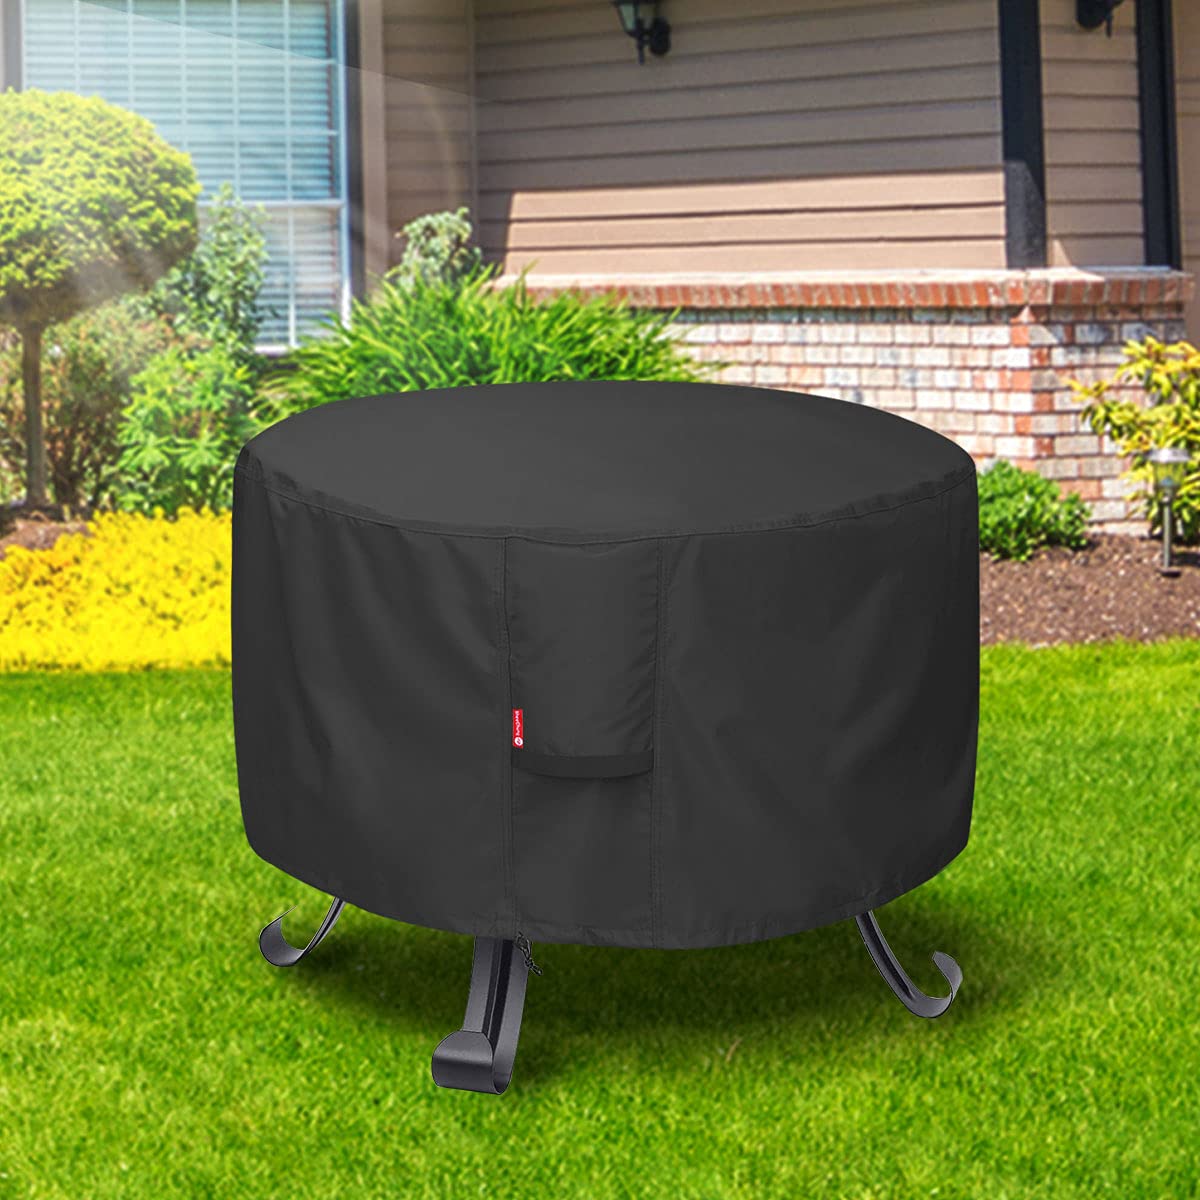 Round Gas Fire Pit / Table Cover,Fits 22-32 inch Firepit/Bowl,Heavy Duty 600D Polyester with PVC Coating Material, 100% Weather Resistant&Waterproof for Backyard, Porch, Camping, BBQ (Round-32”Dx16”H)